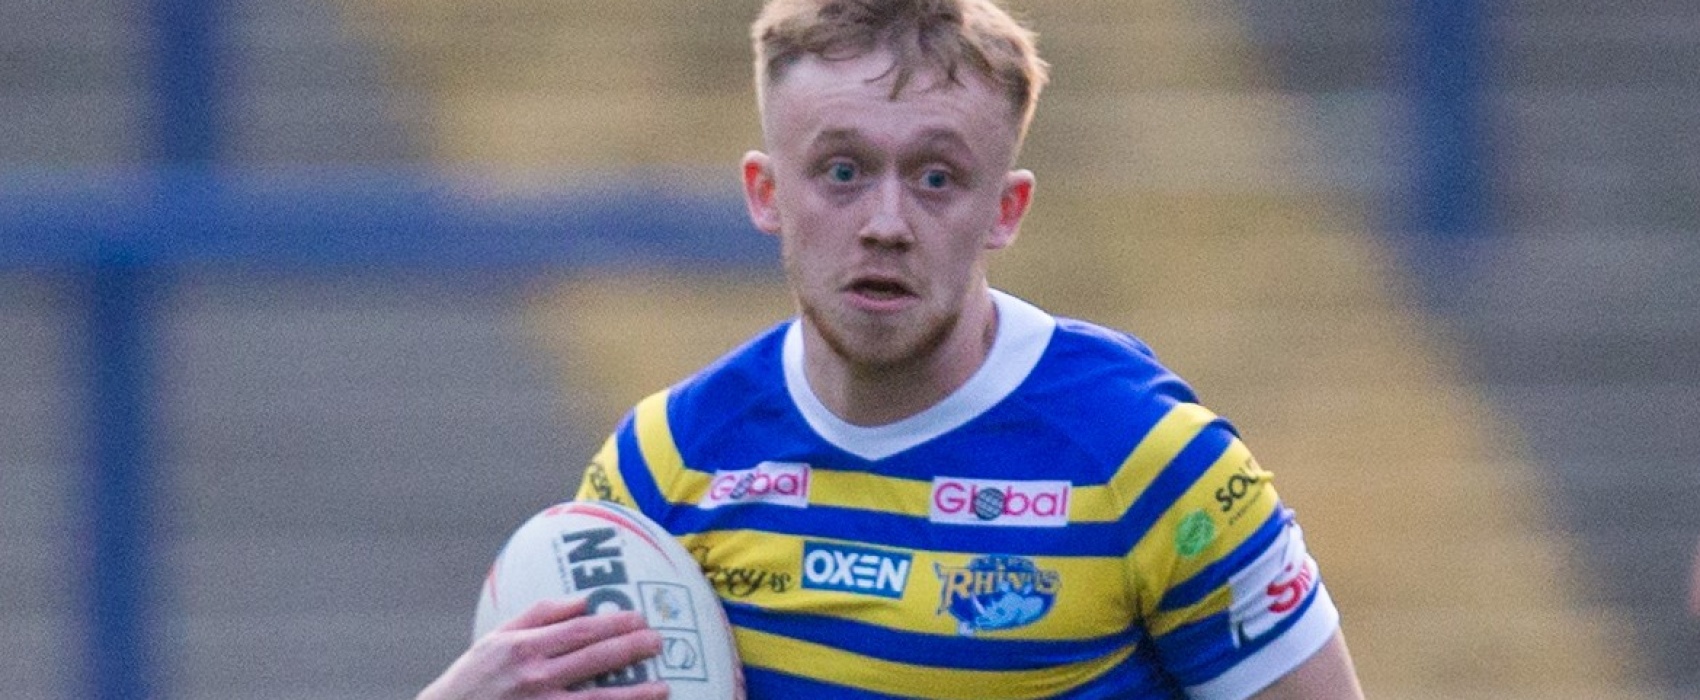 Sheffield swoop for Sheils 